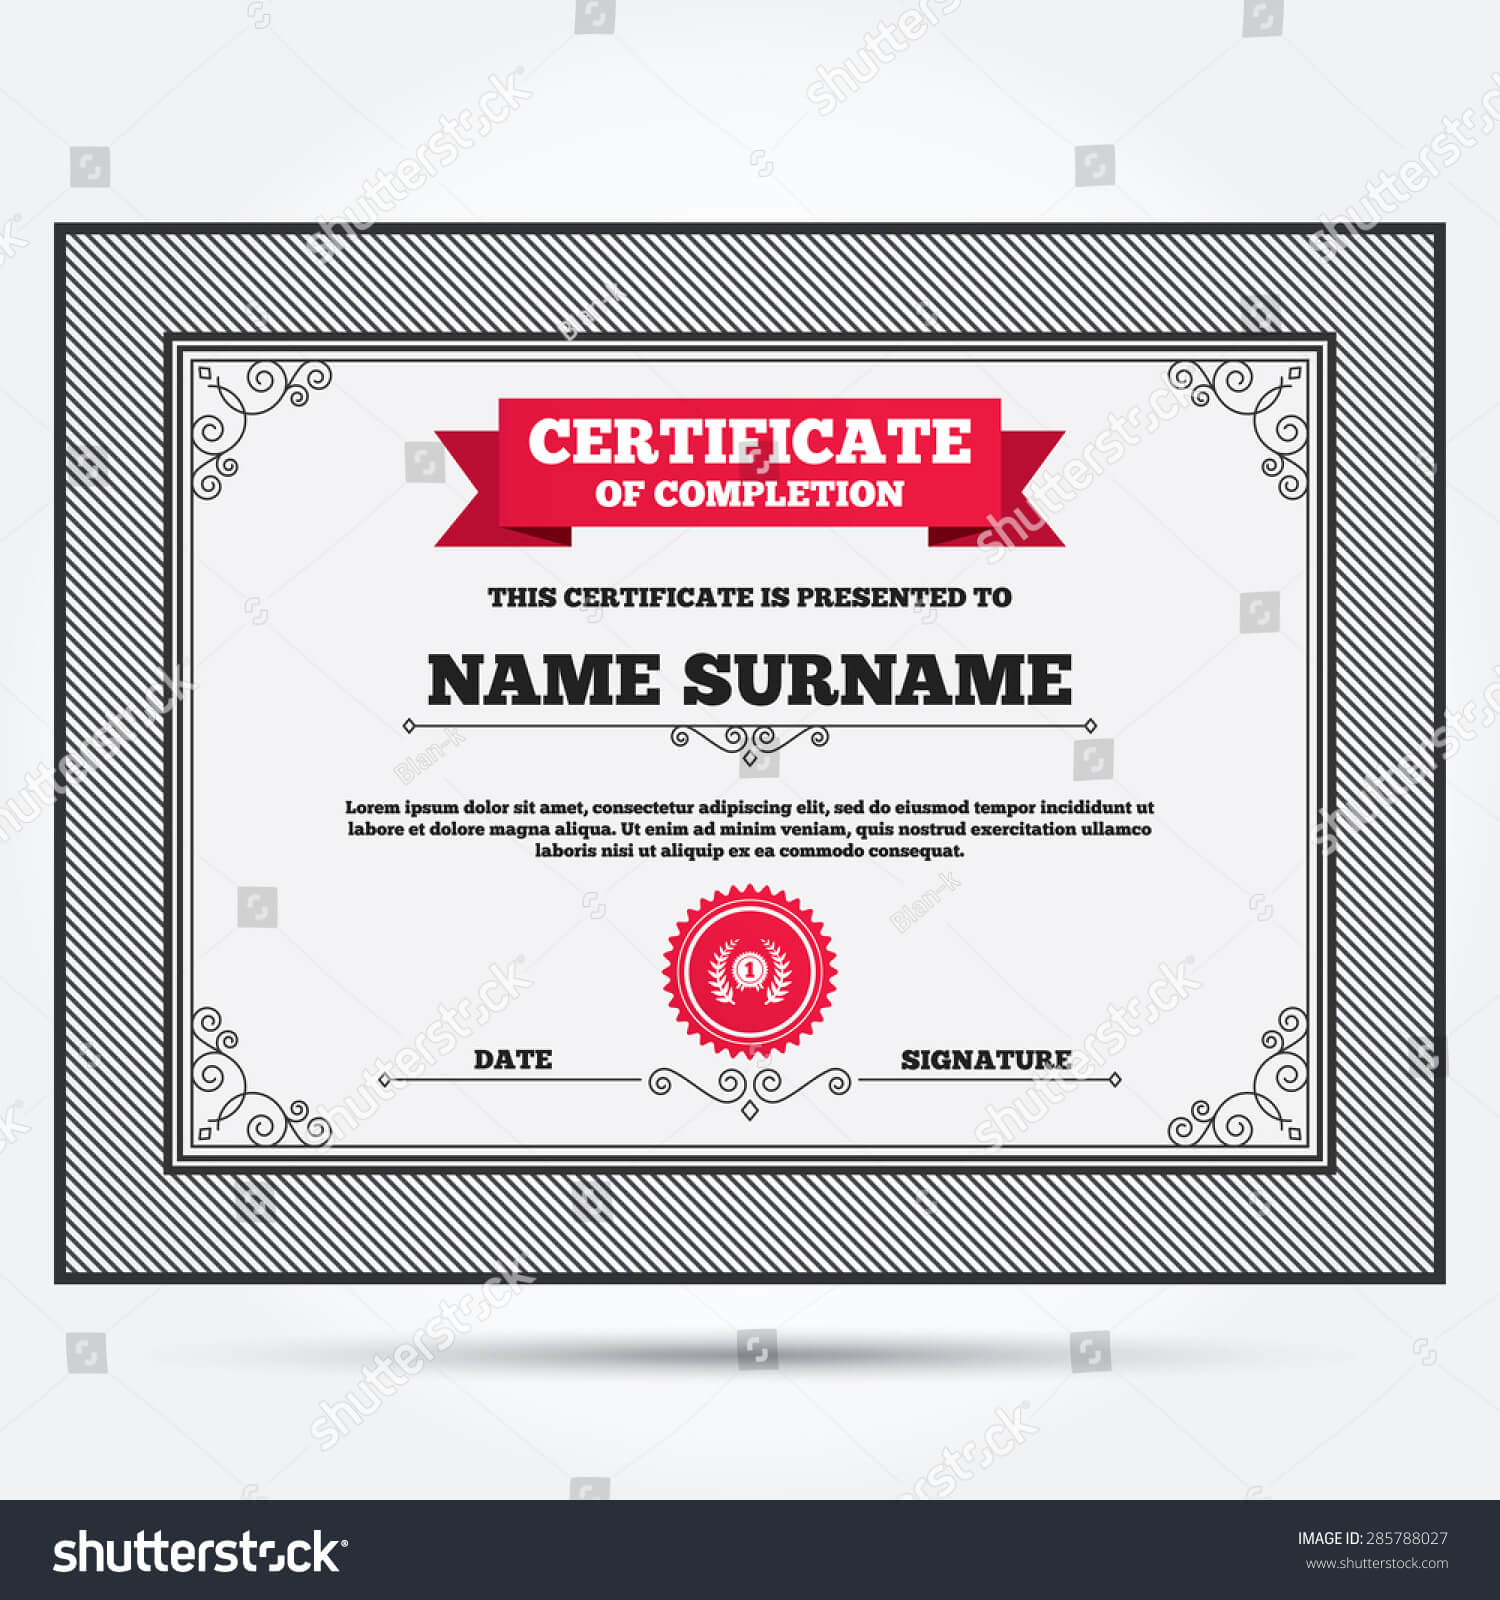 Certificate Completion First Place Award Sign Stock Vector Pertaining To First Place Certificate Template